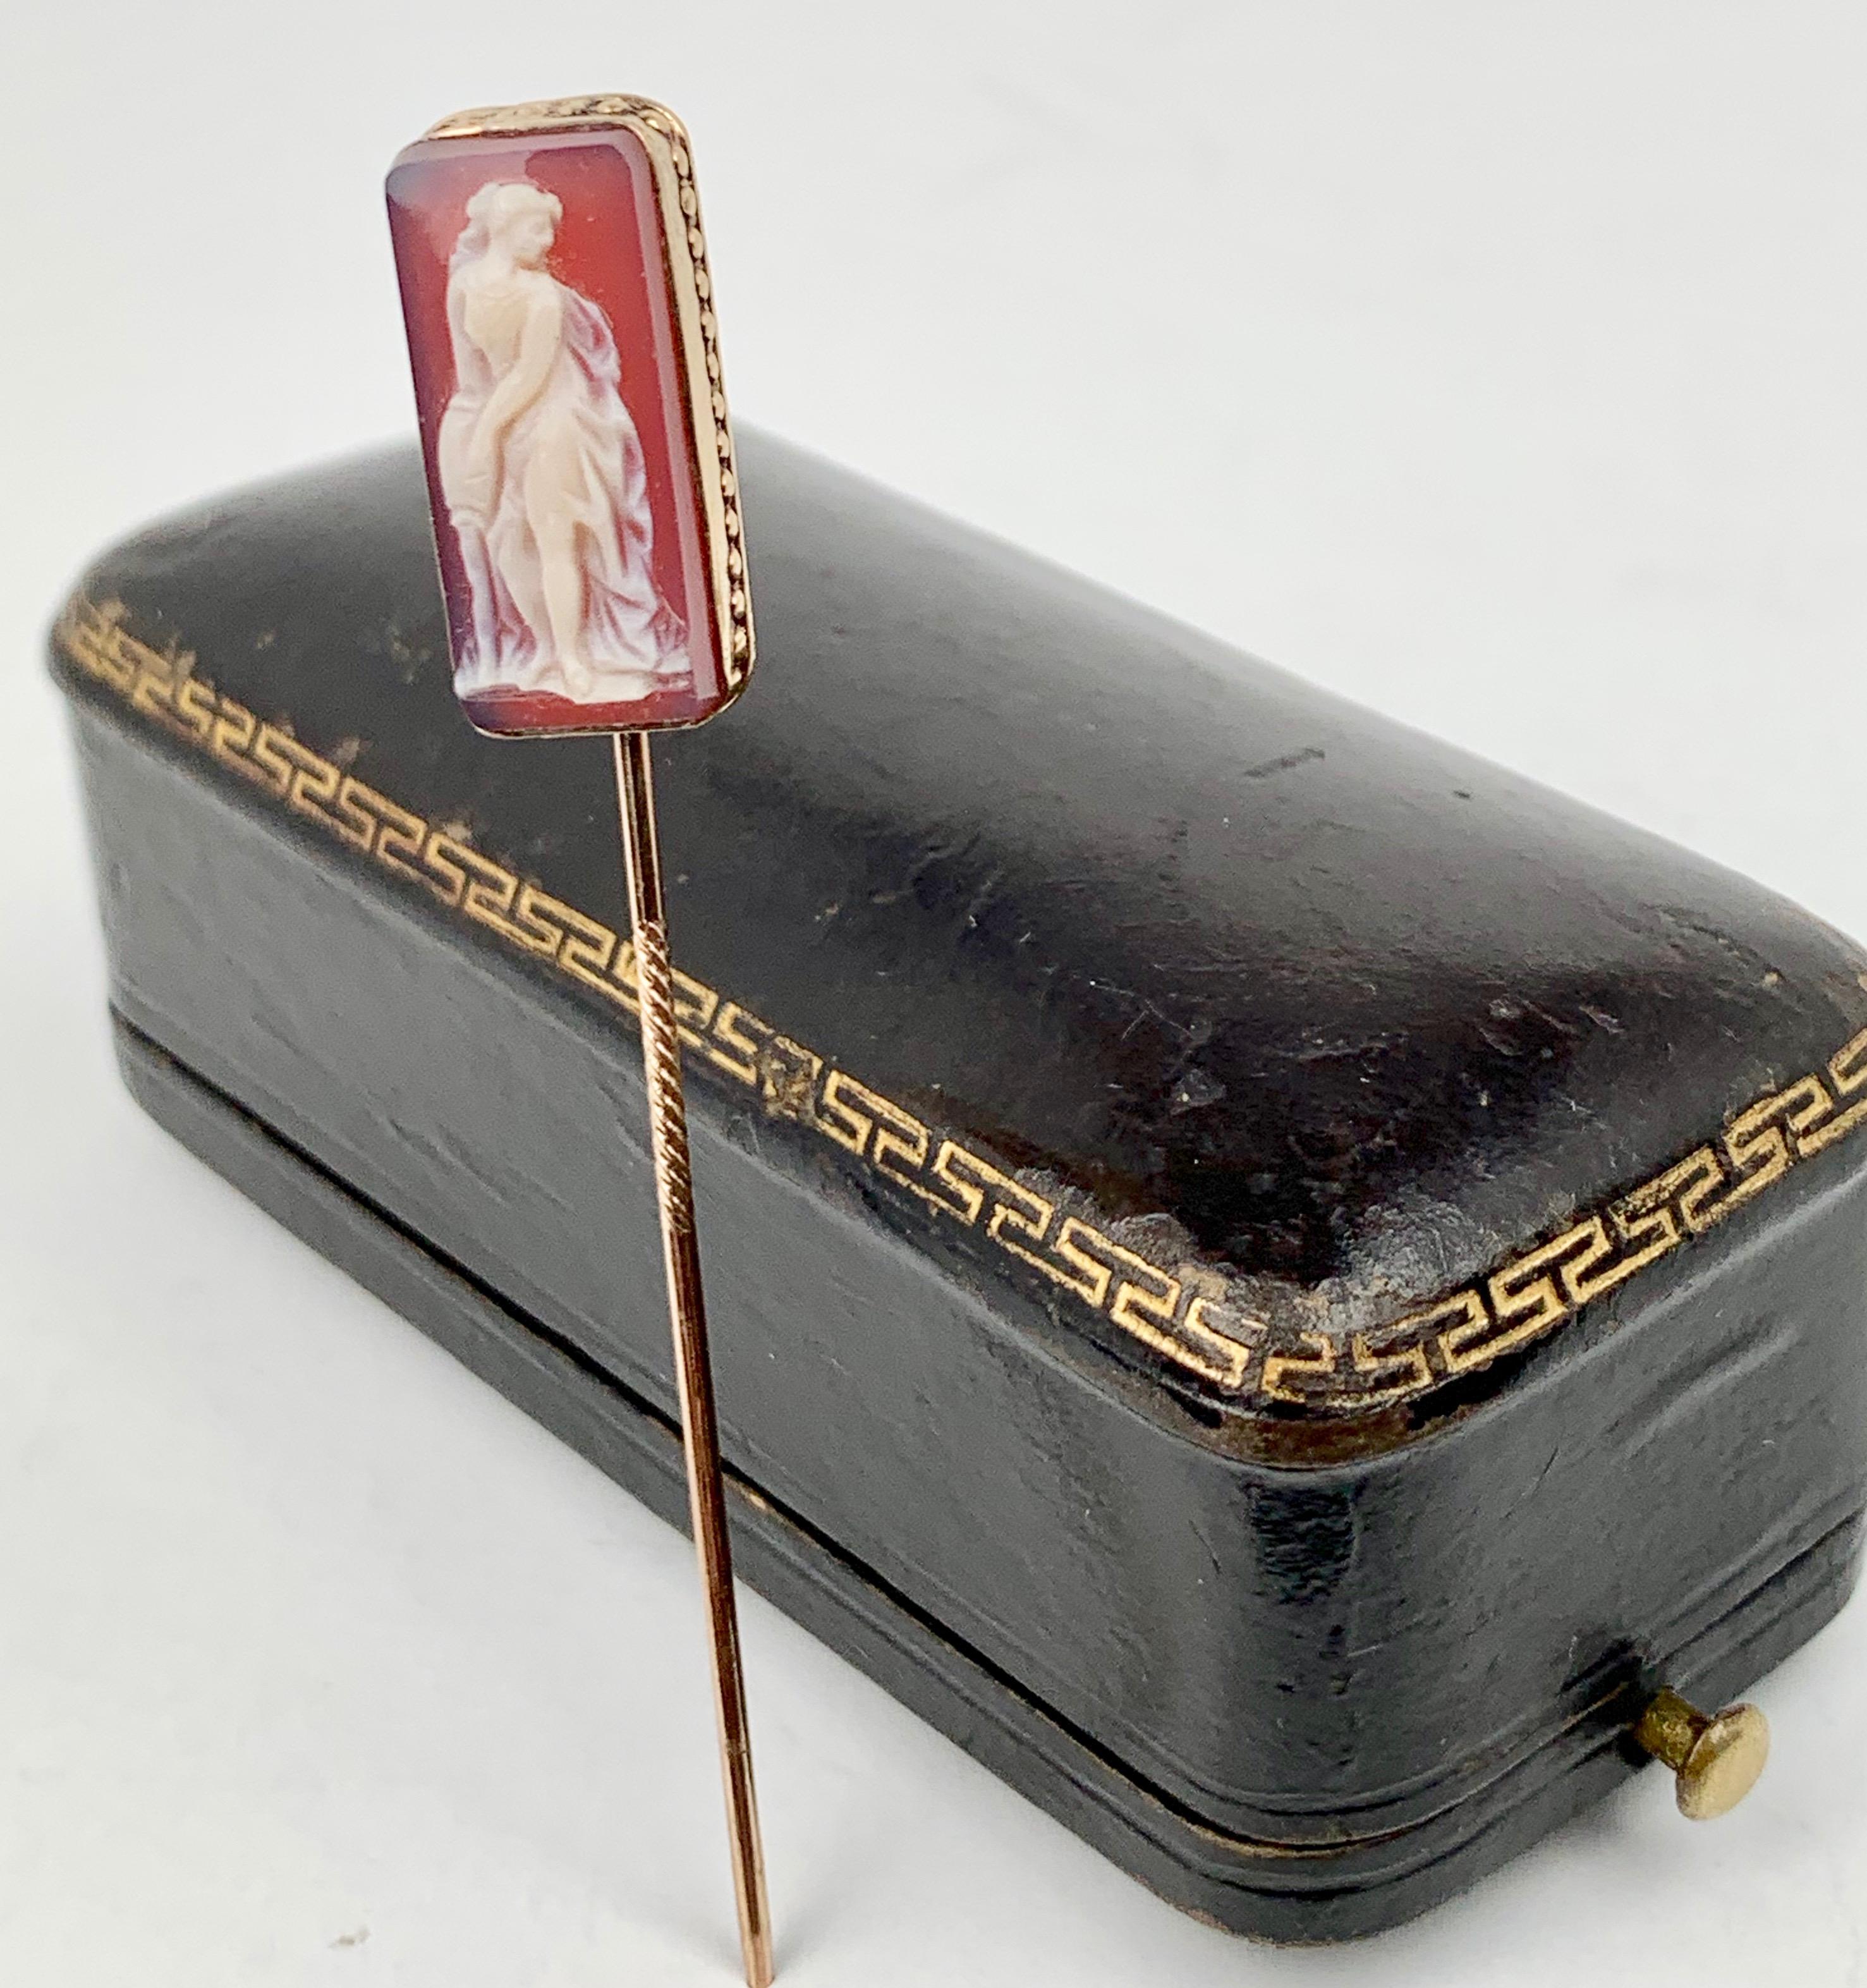 Once worn by Nat King Cole this agate cameo and gold stickpin still rests in its original leather presentation case gold tooled with a greek key pattern.  The subject is the classical Greek female figure poring water from a jug.